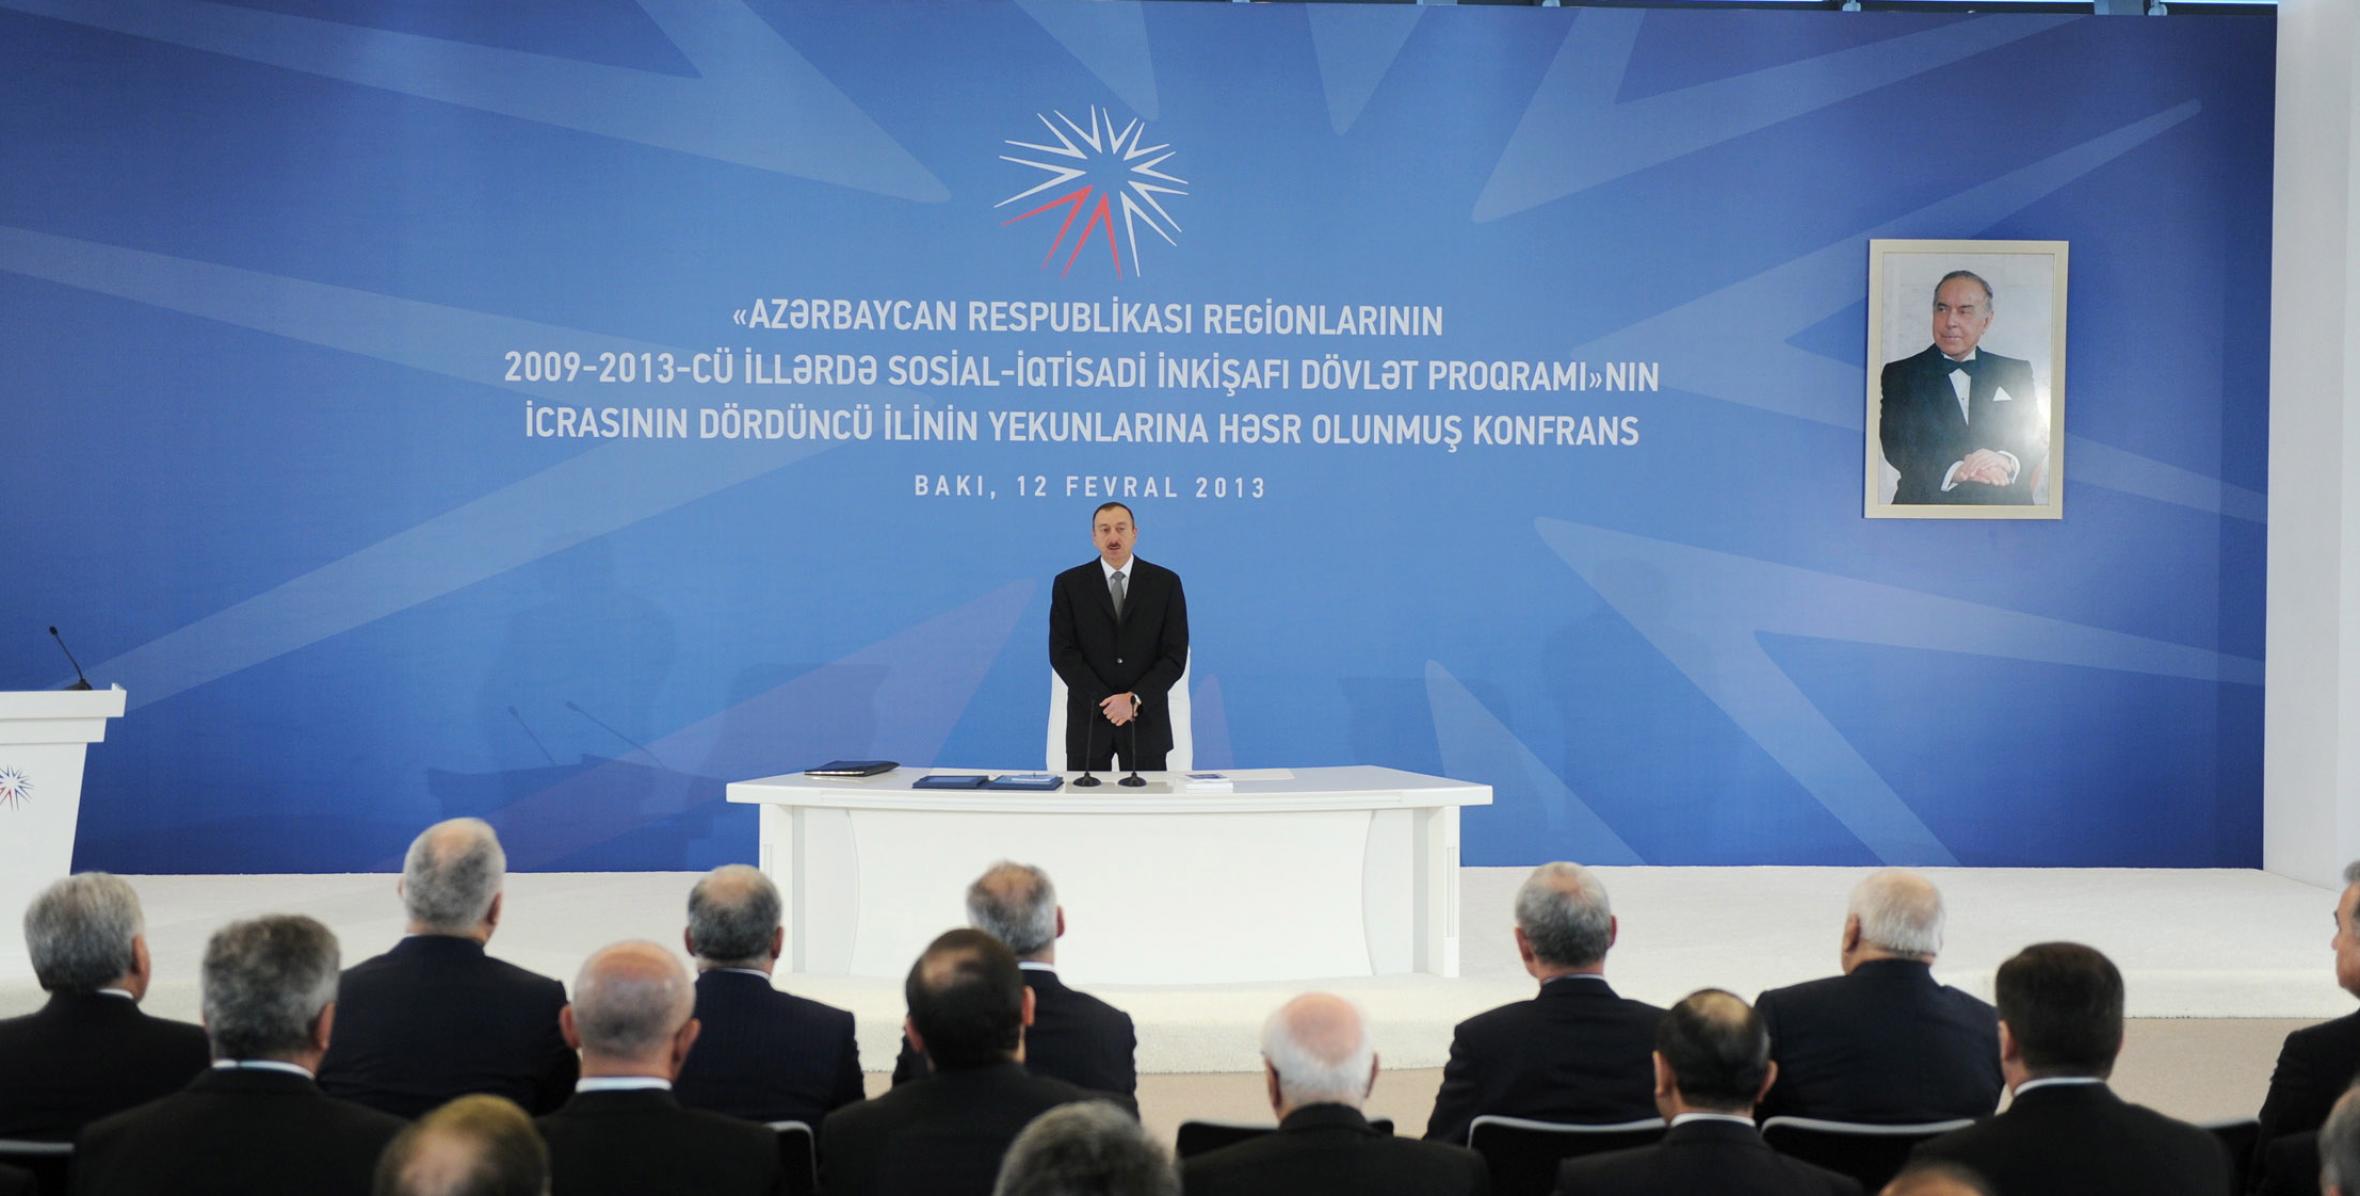 Ilham Aliyev chaired a conference dedicated to the results of the fourth year of the “State Program on the socioeconomic development of districts of the Republic of Azerbaijan in 2009-2013”